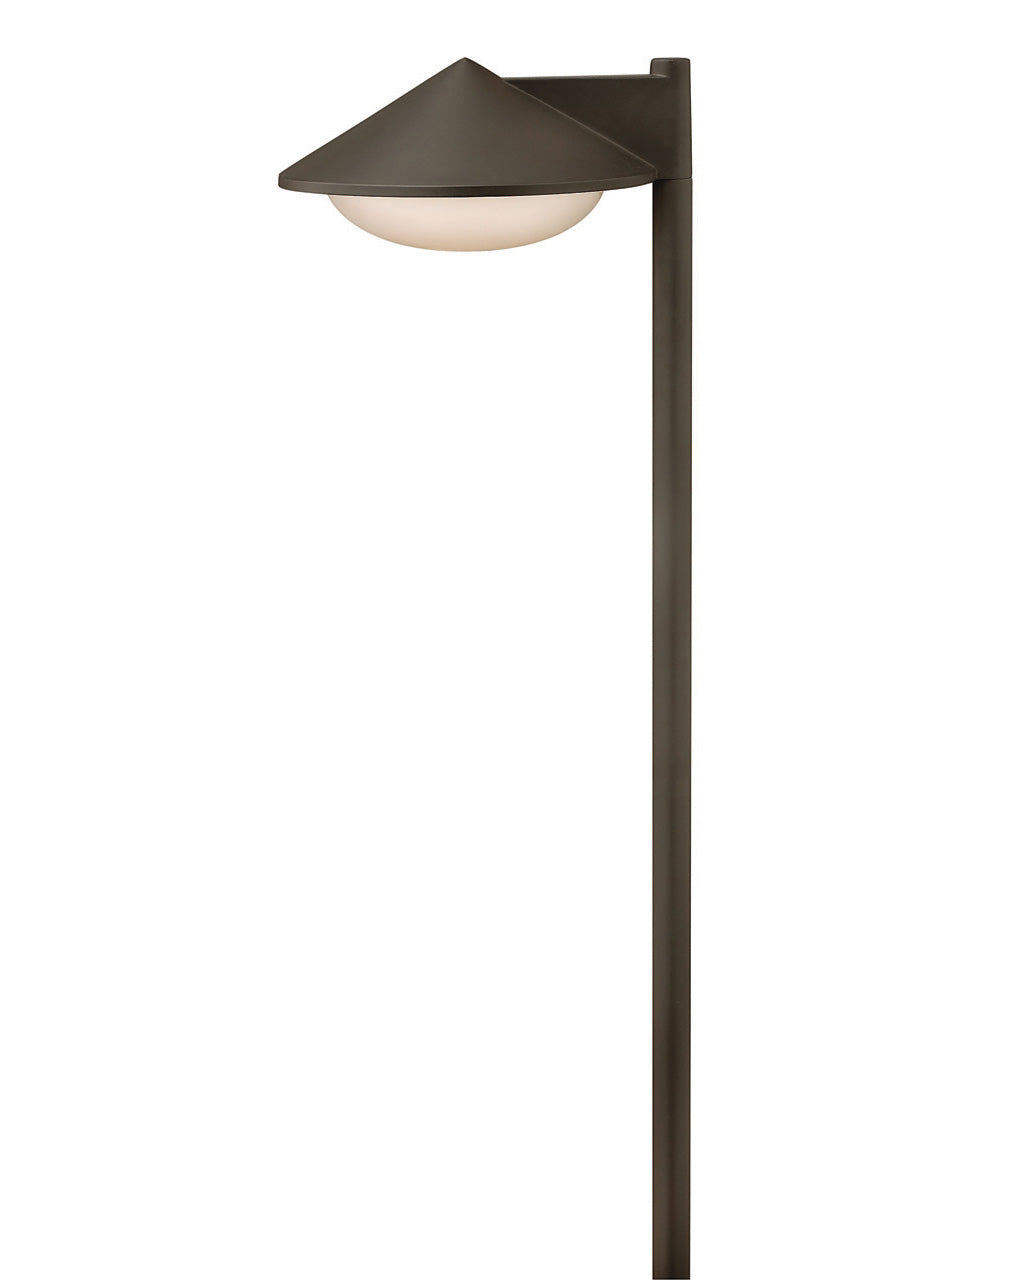 Hinkley  Contempo LED Path Light Outdoor Light Fixture Hinkley   